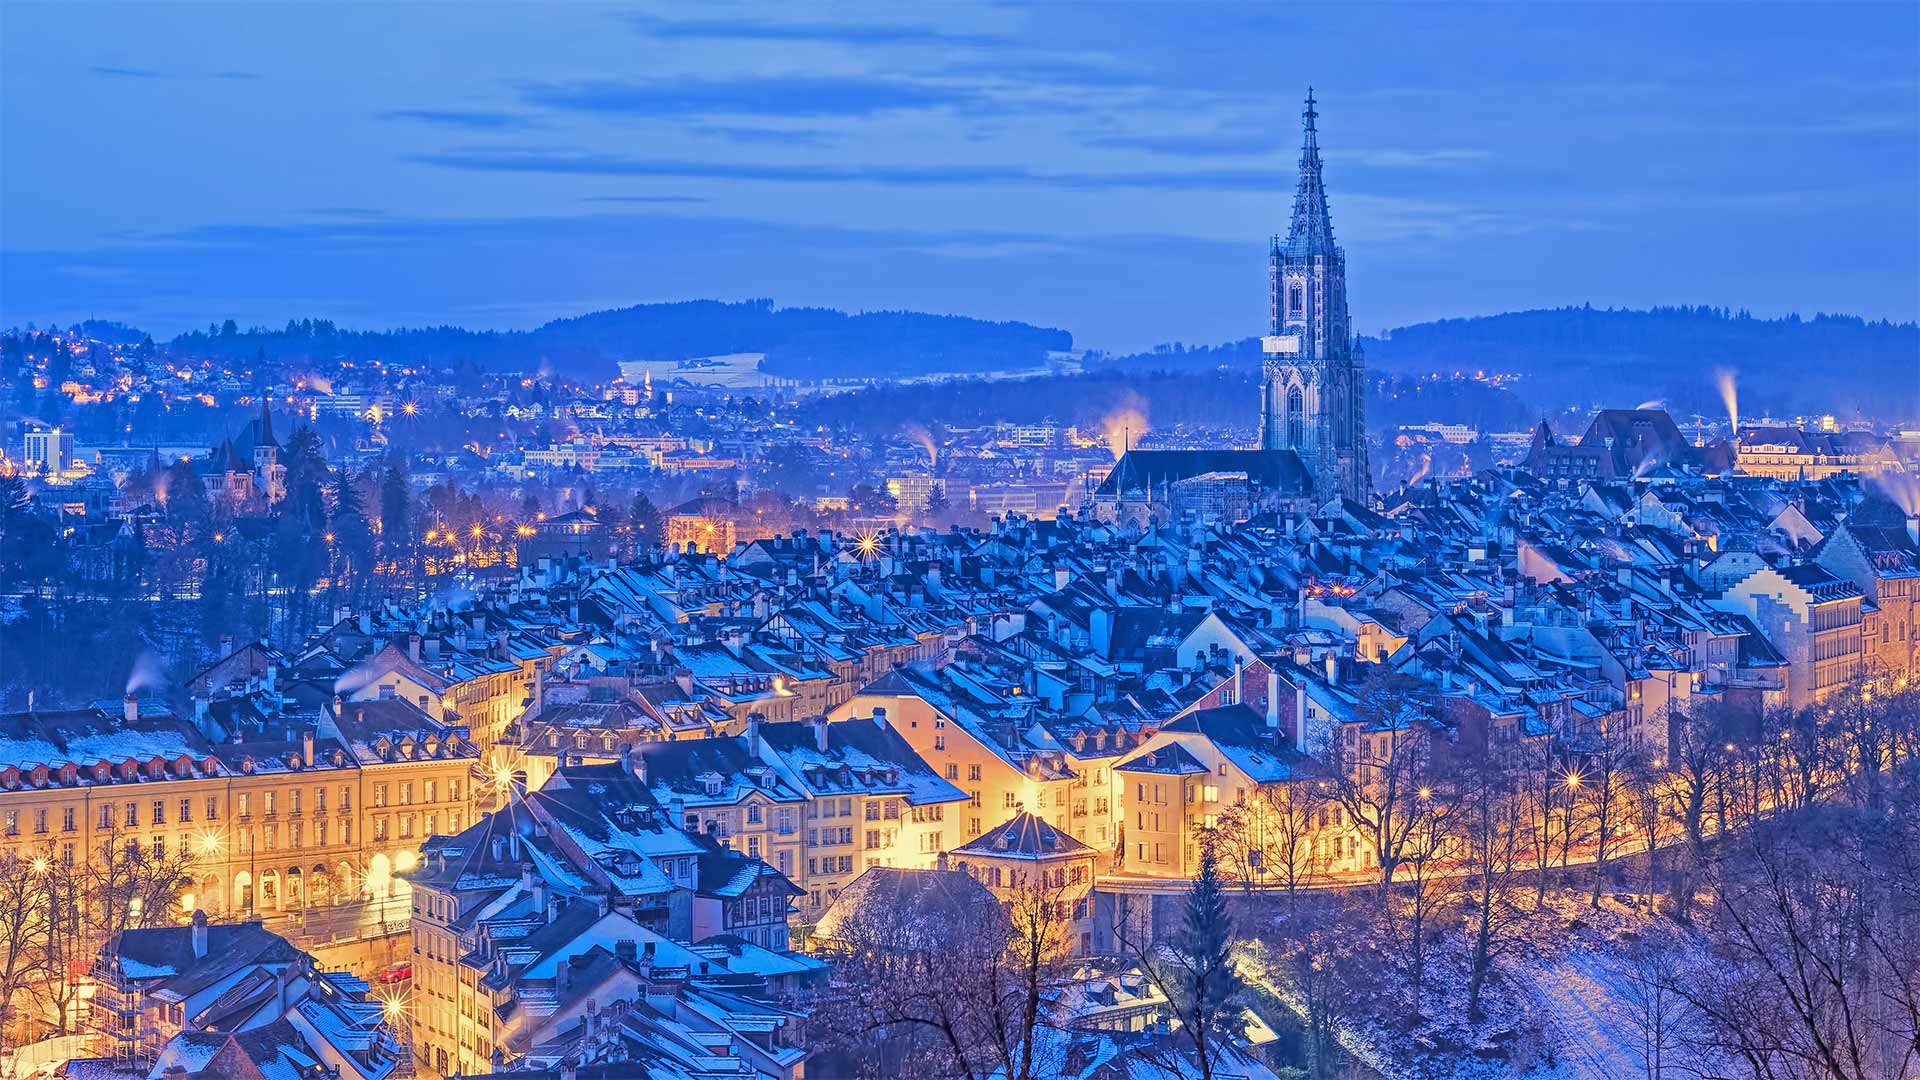 The Old City of Bern, Switzerland - Xantana/Getty Images)